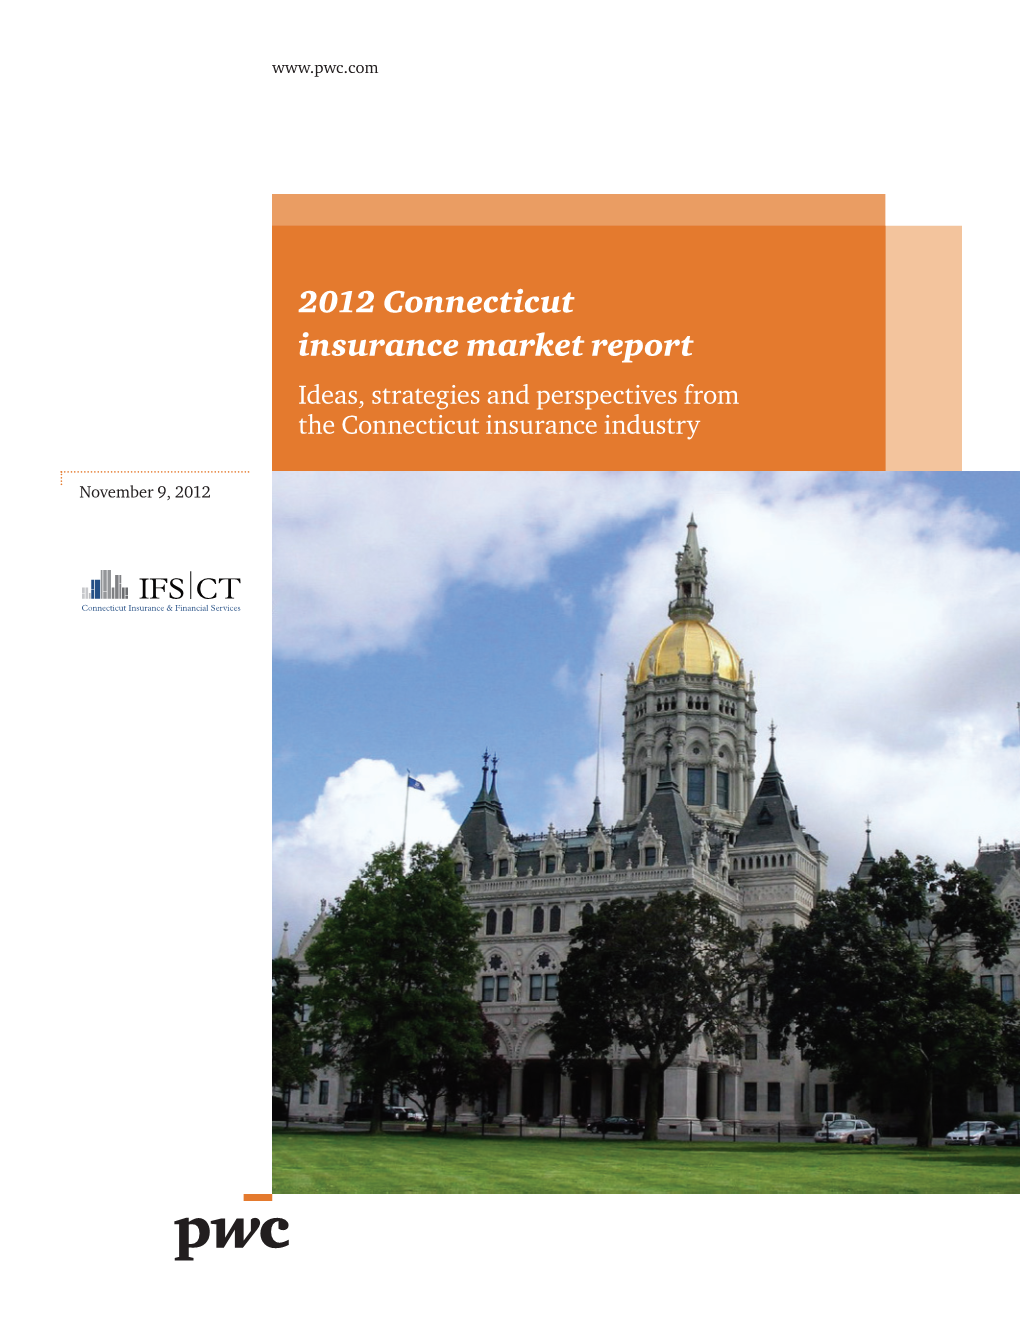 2012 Connecticut Insurance Market Report Ideas, Strategies and Perspectives from the Connecticut Insurance Industry